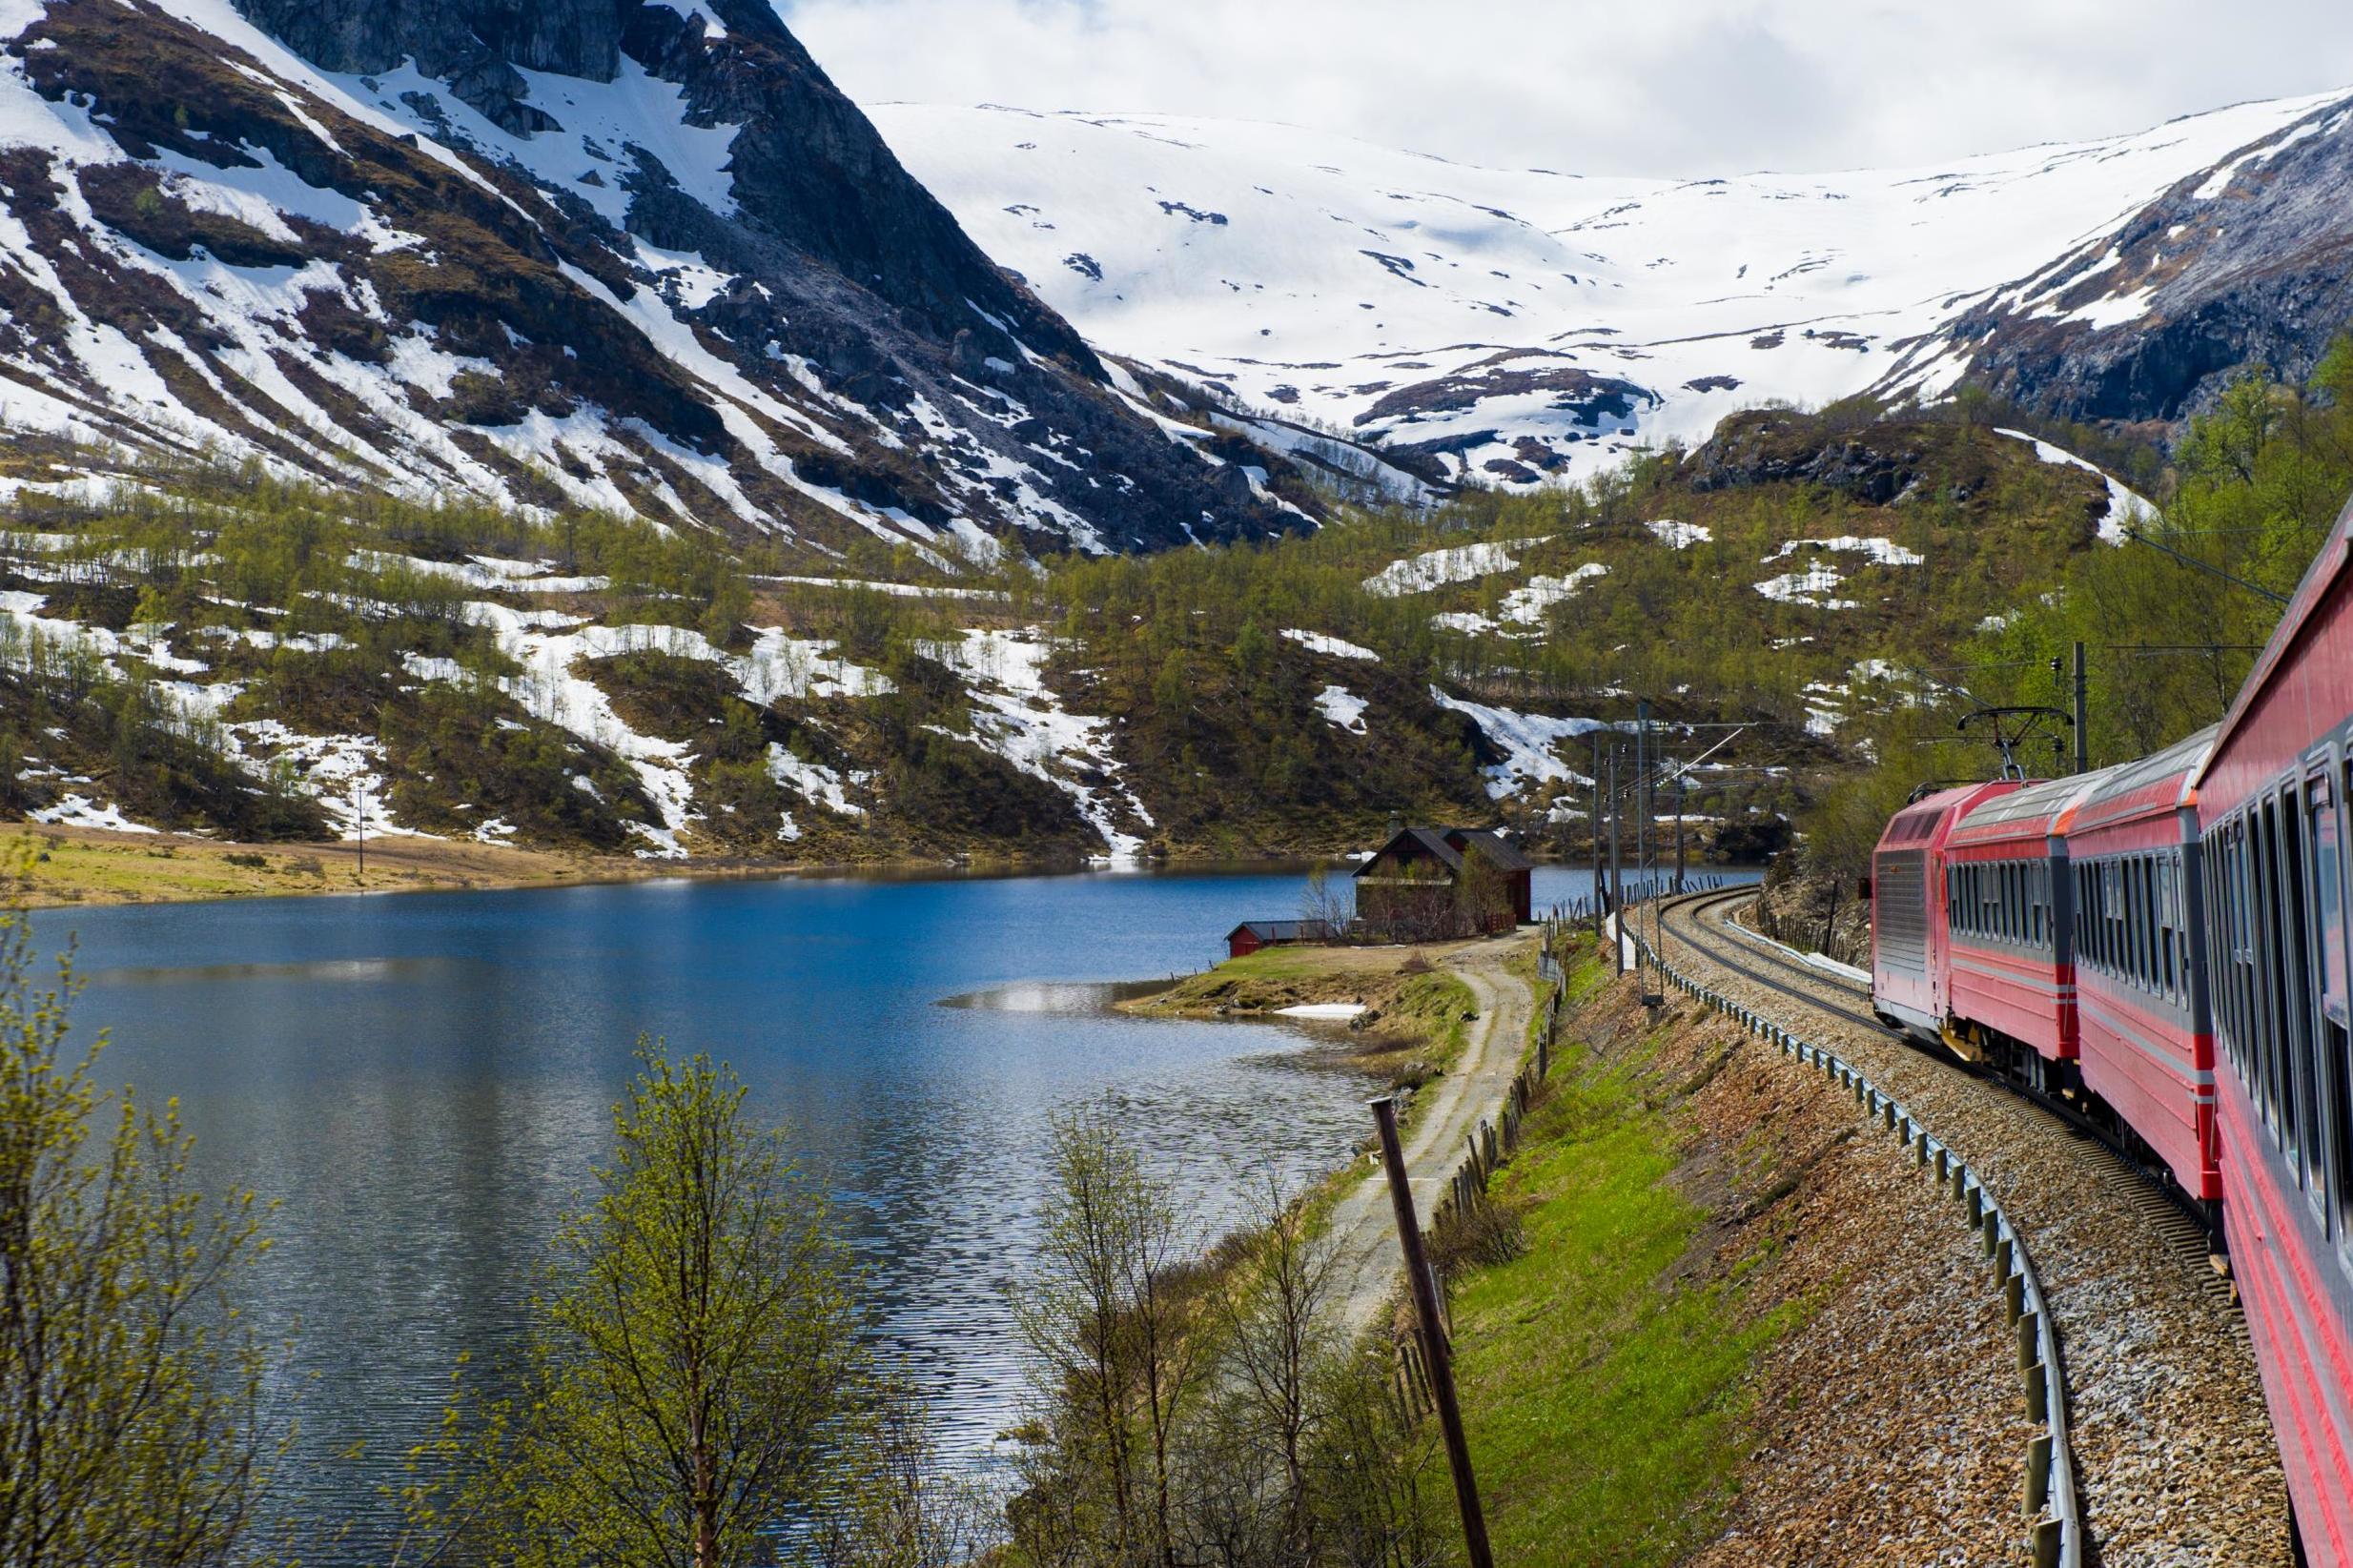 Take the Bergen Railway between Bergen and Voss for some spectacular scenery